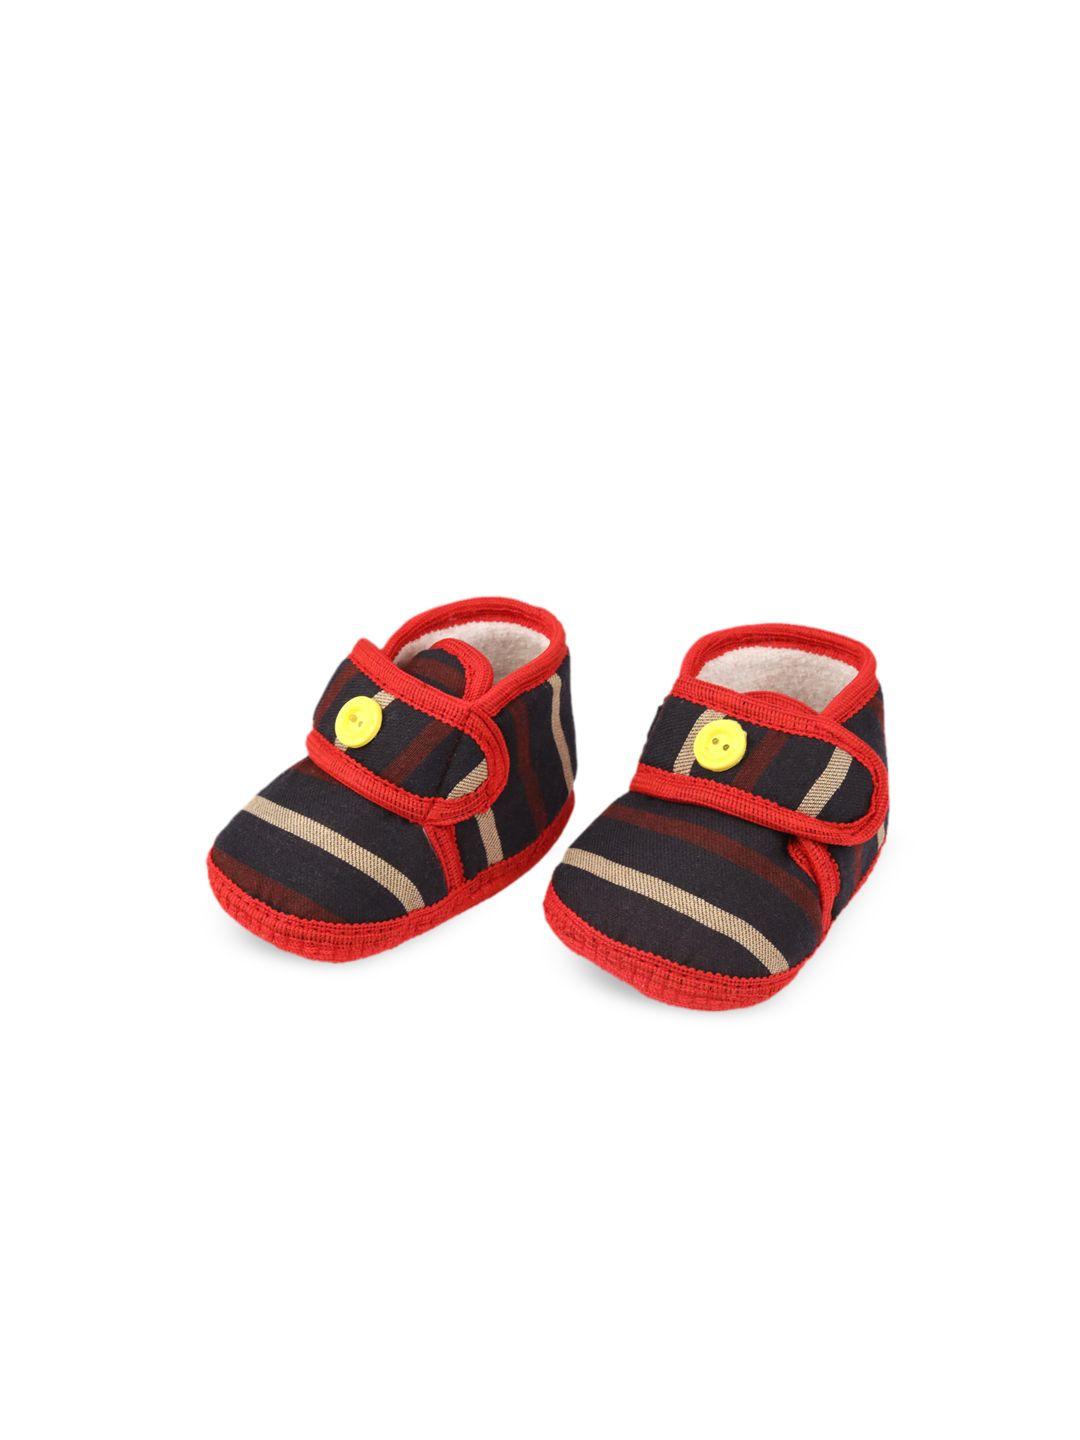 spiky-infant-kids-red-&-black-striped-anti-skid-cotton-booties